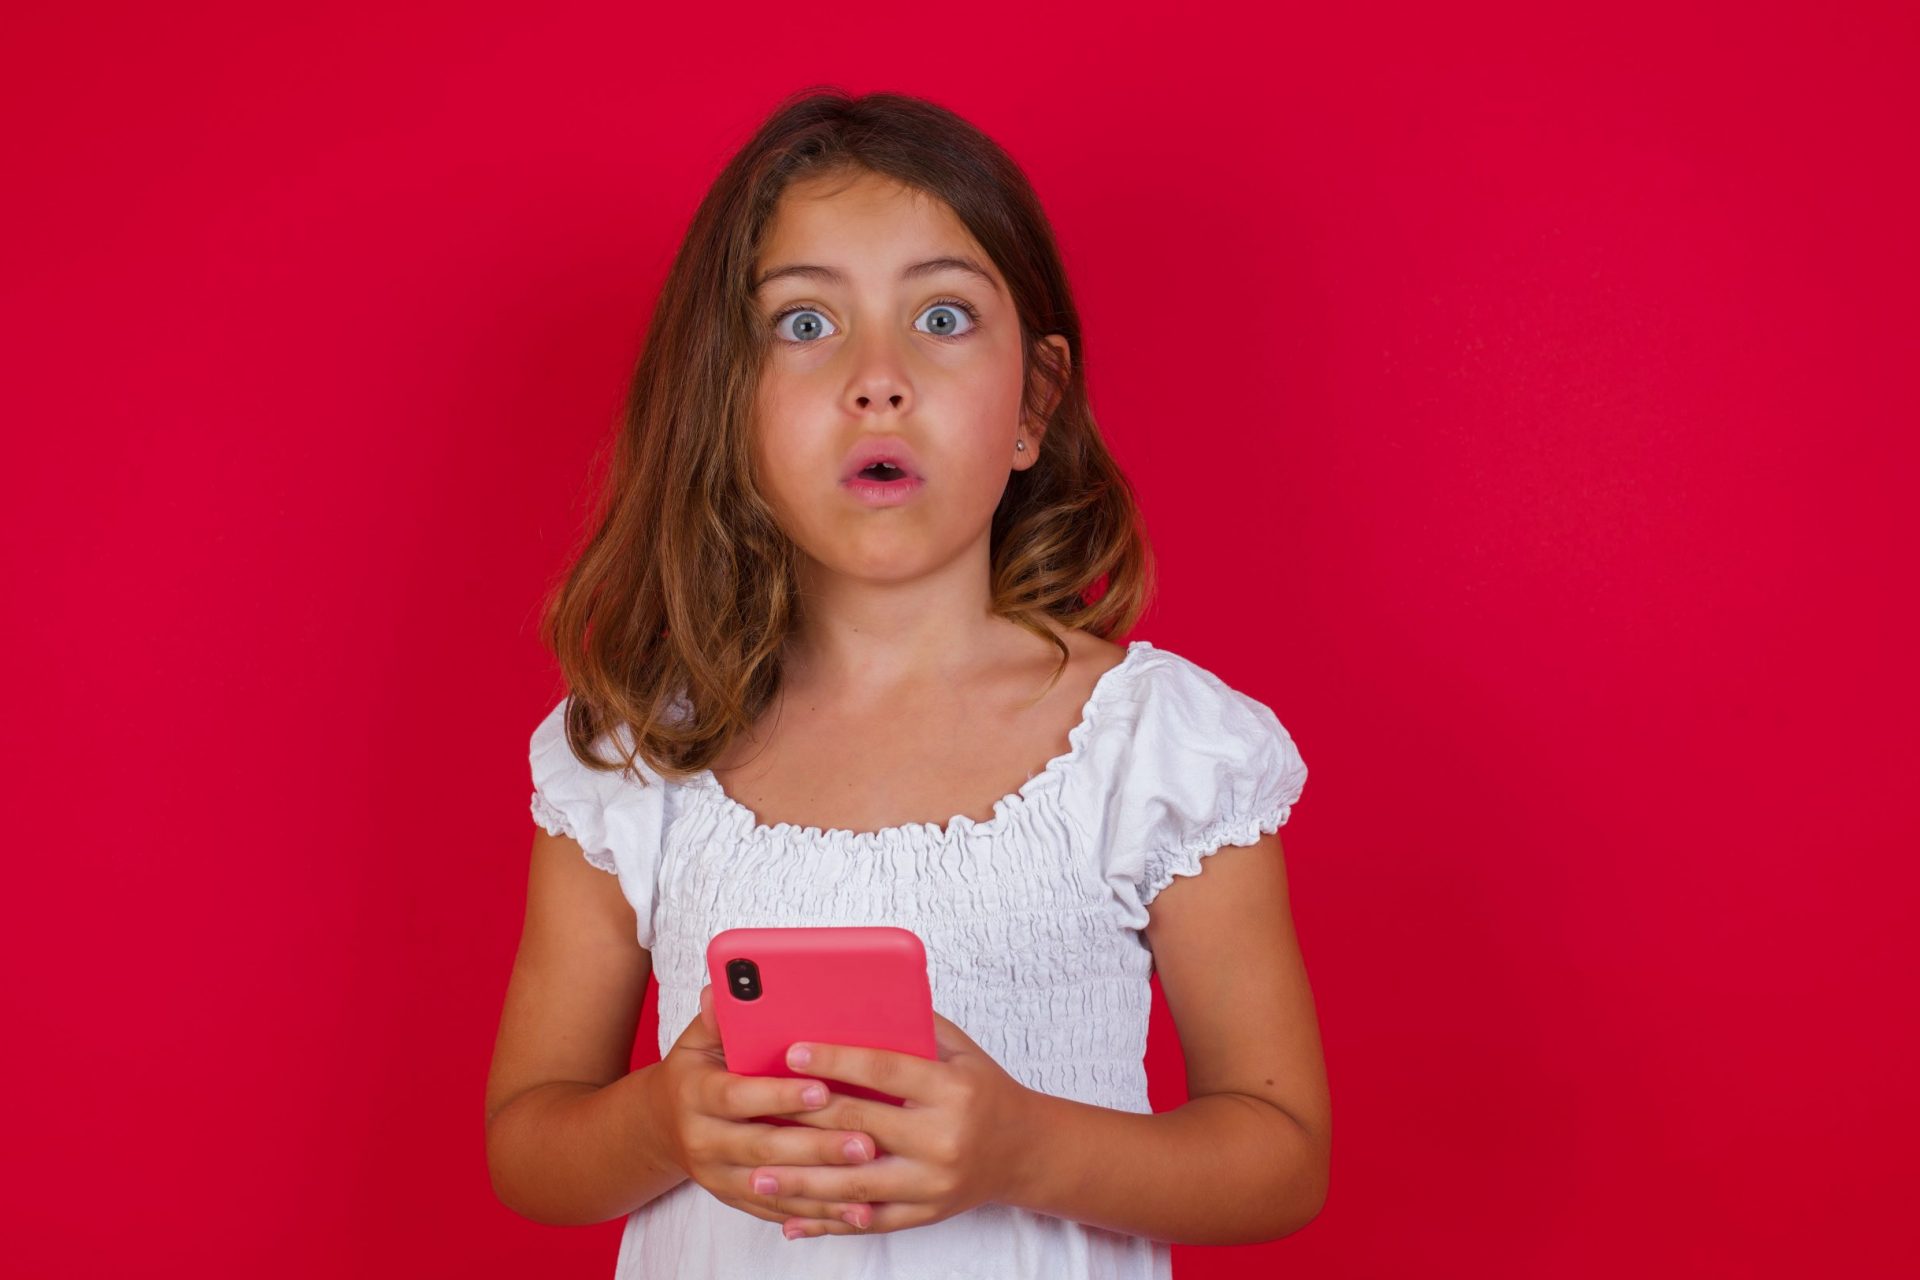 Young girl surprised by what she's seen on her smartphone